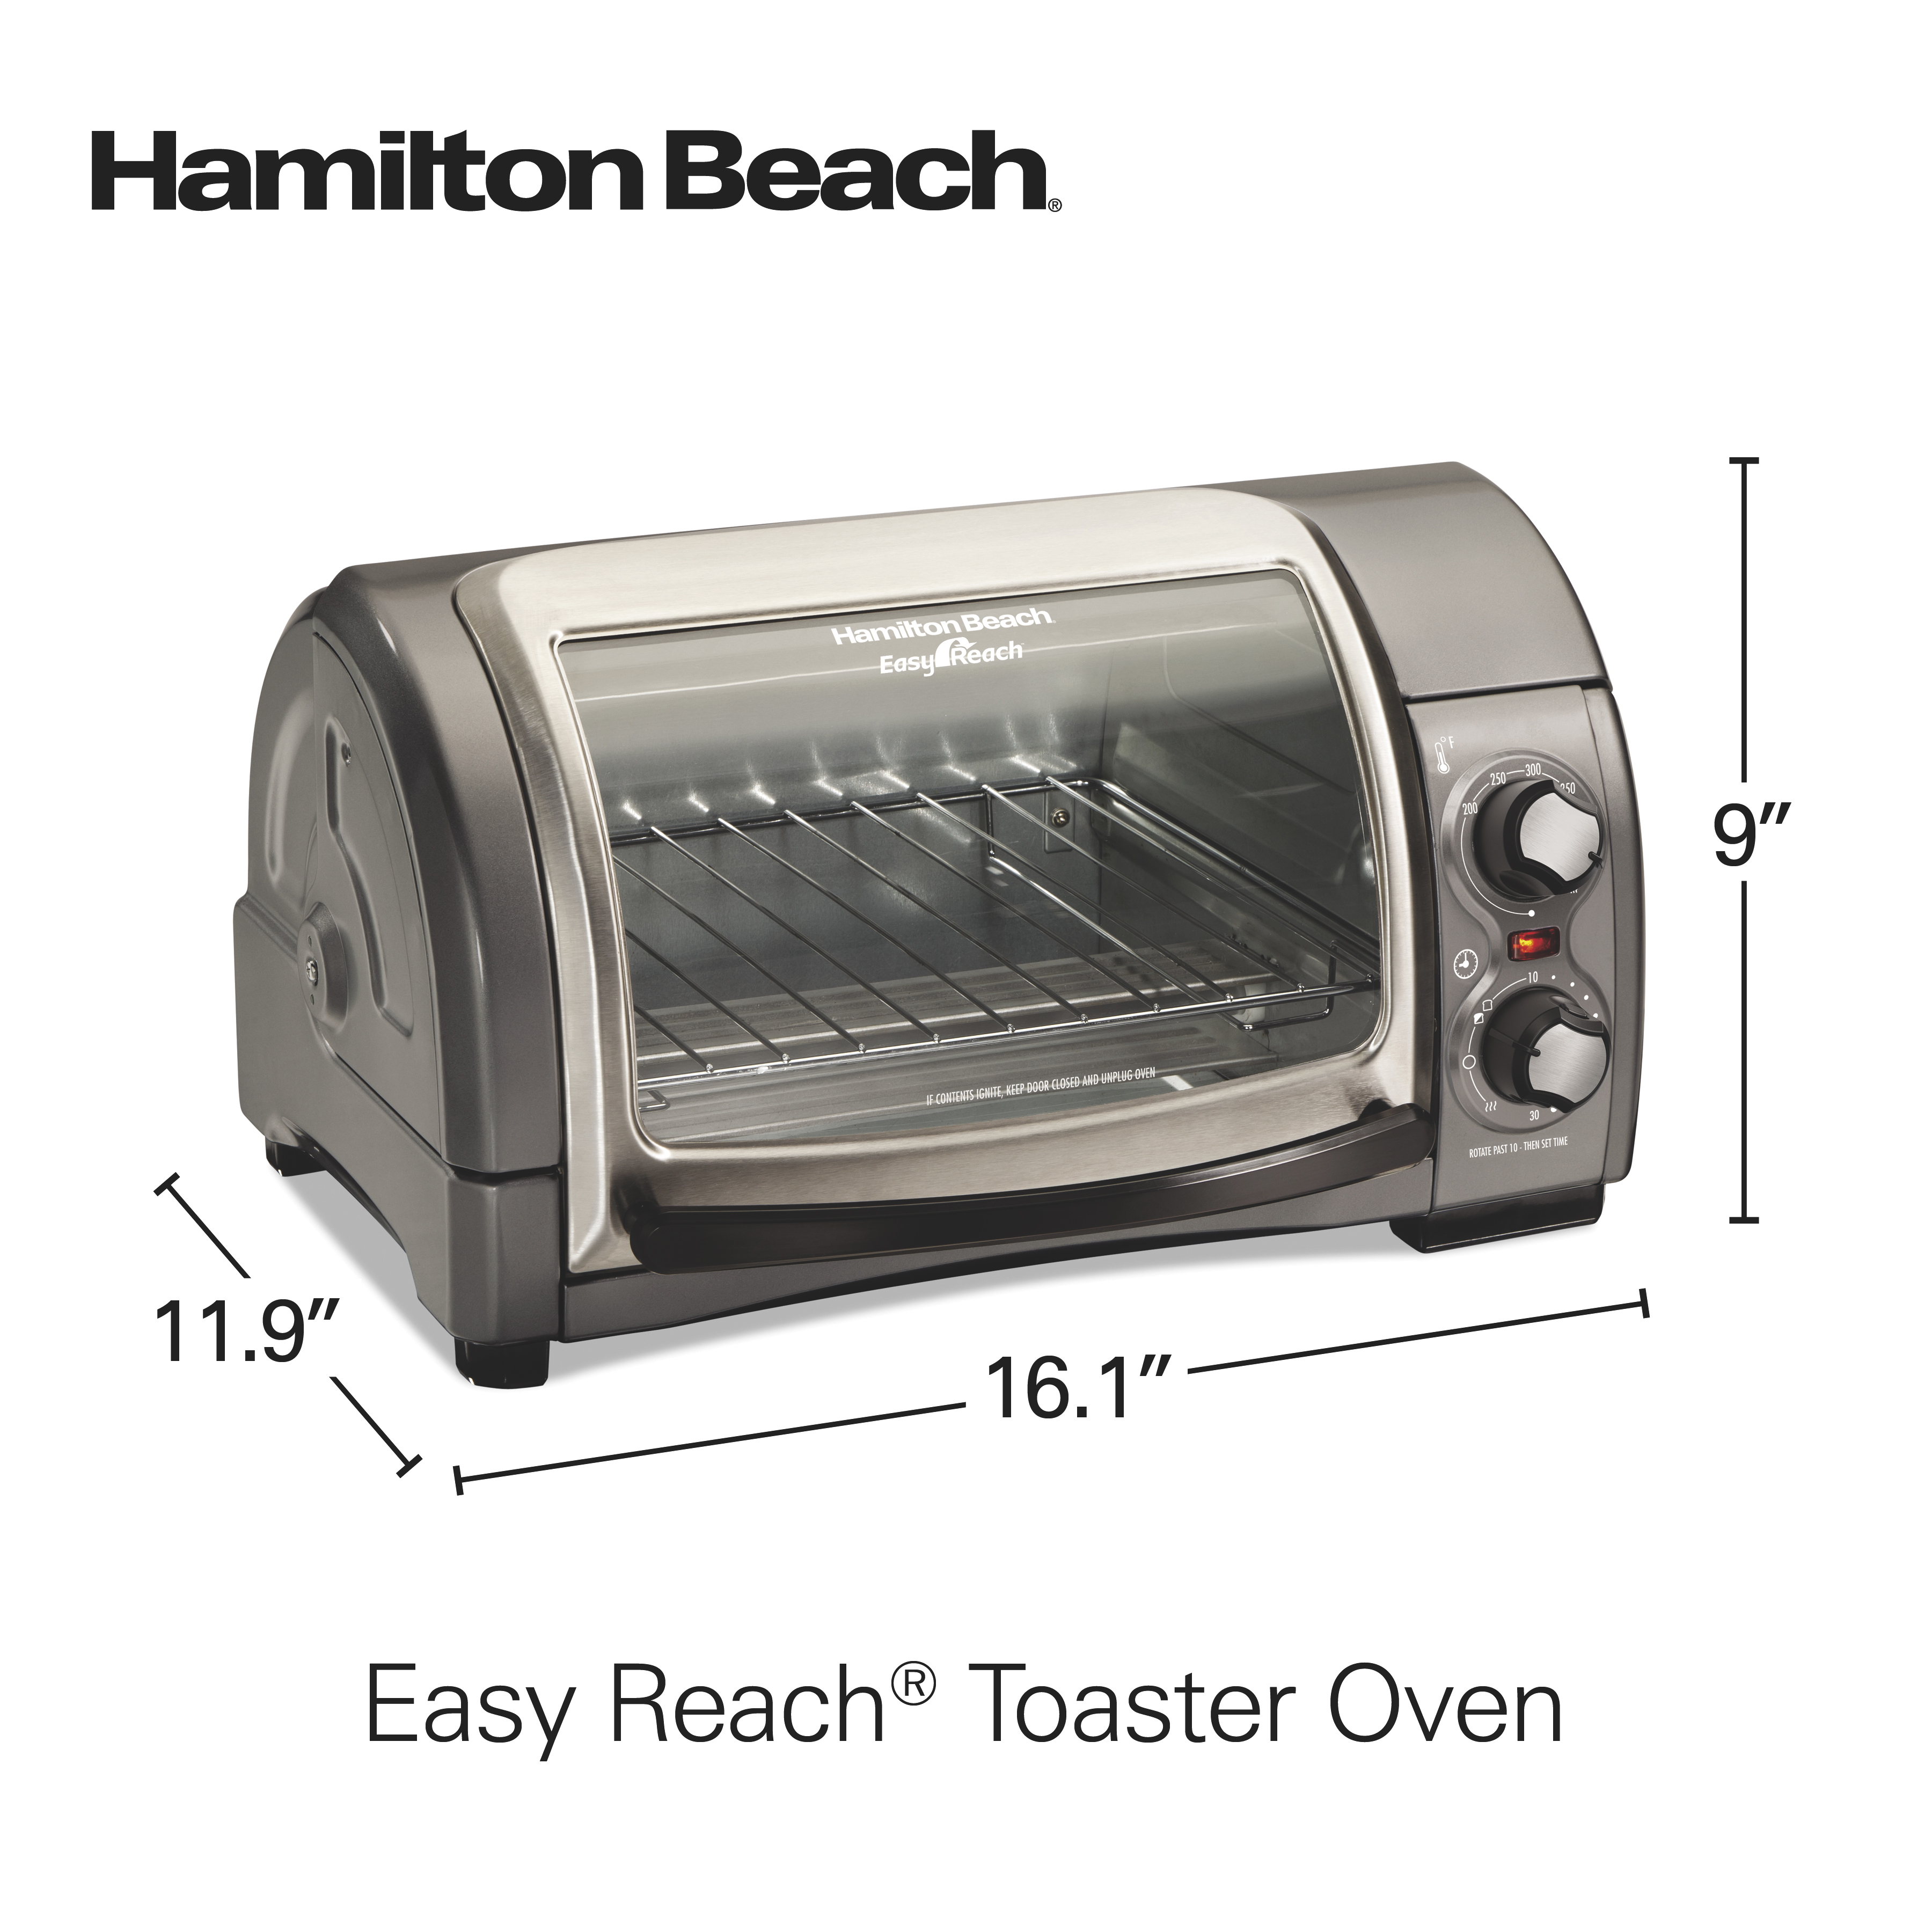 Hamilton Beach Easy Reach 4-Slice Countertop Toaster Oven With Roll-Top Door, 1200 Watts, Fits 9” Pizza, 3 Cooking Functions for Bake, Broil and Toast, Silver, 31334D - image 5 of 9